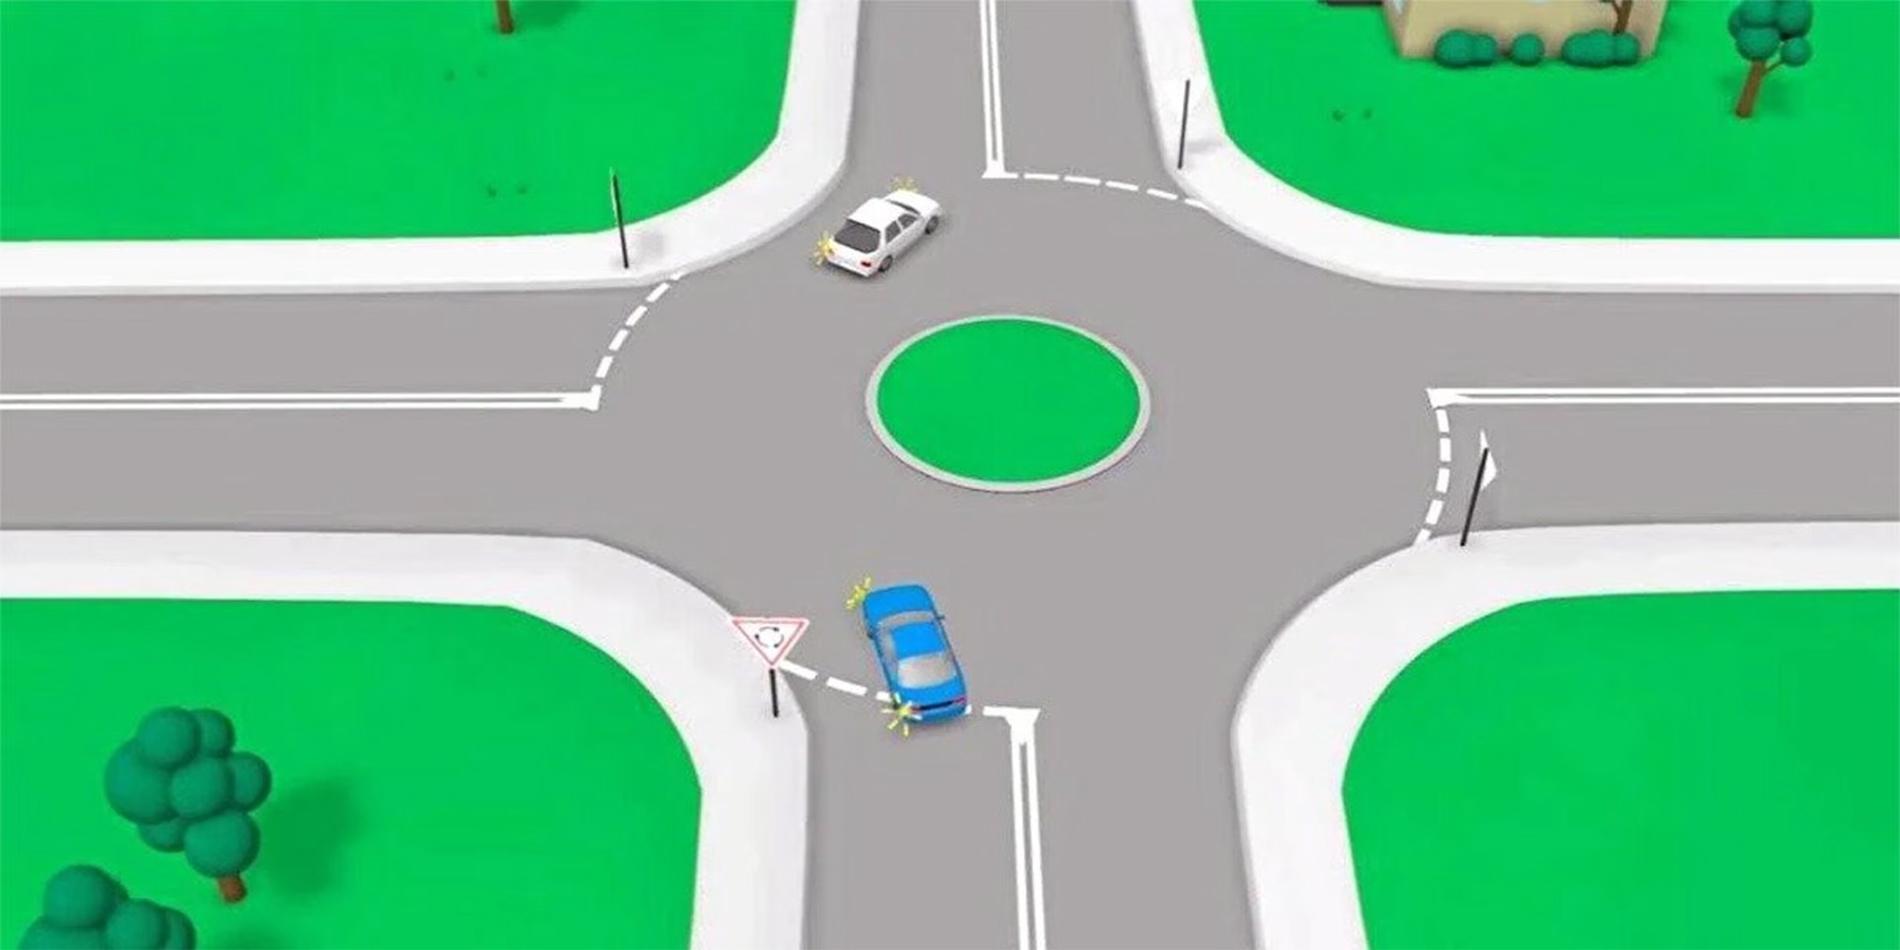 is it legal to change lanes on a roundabout?